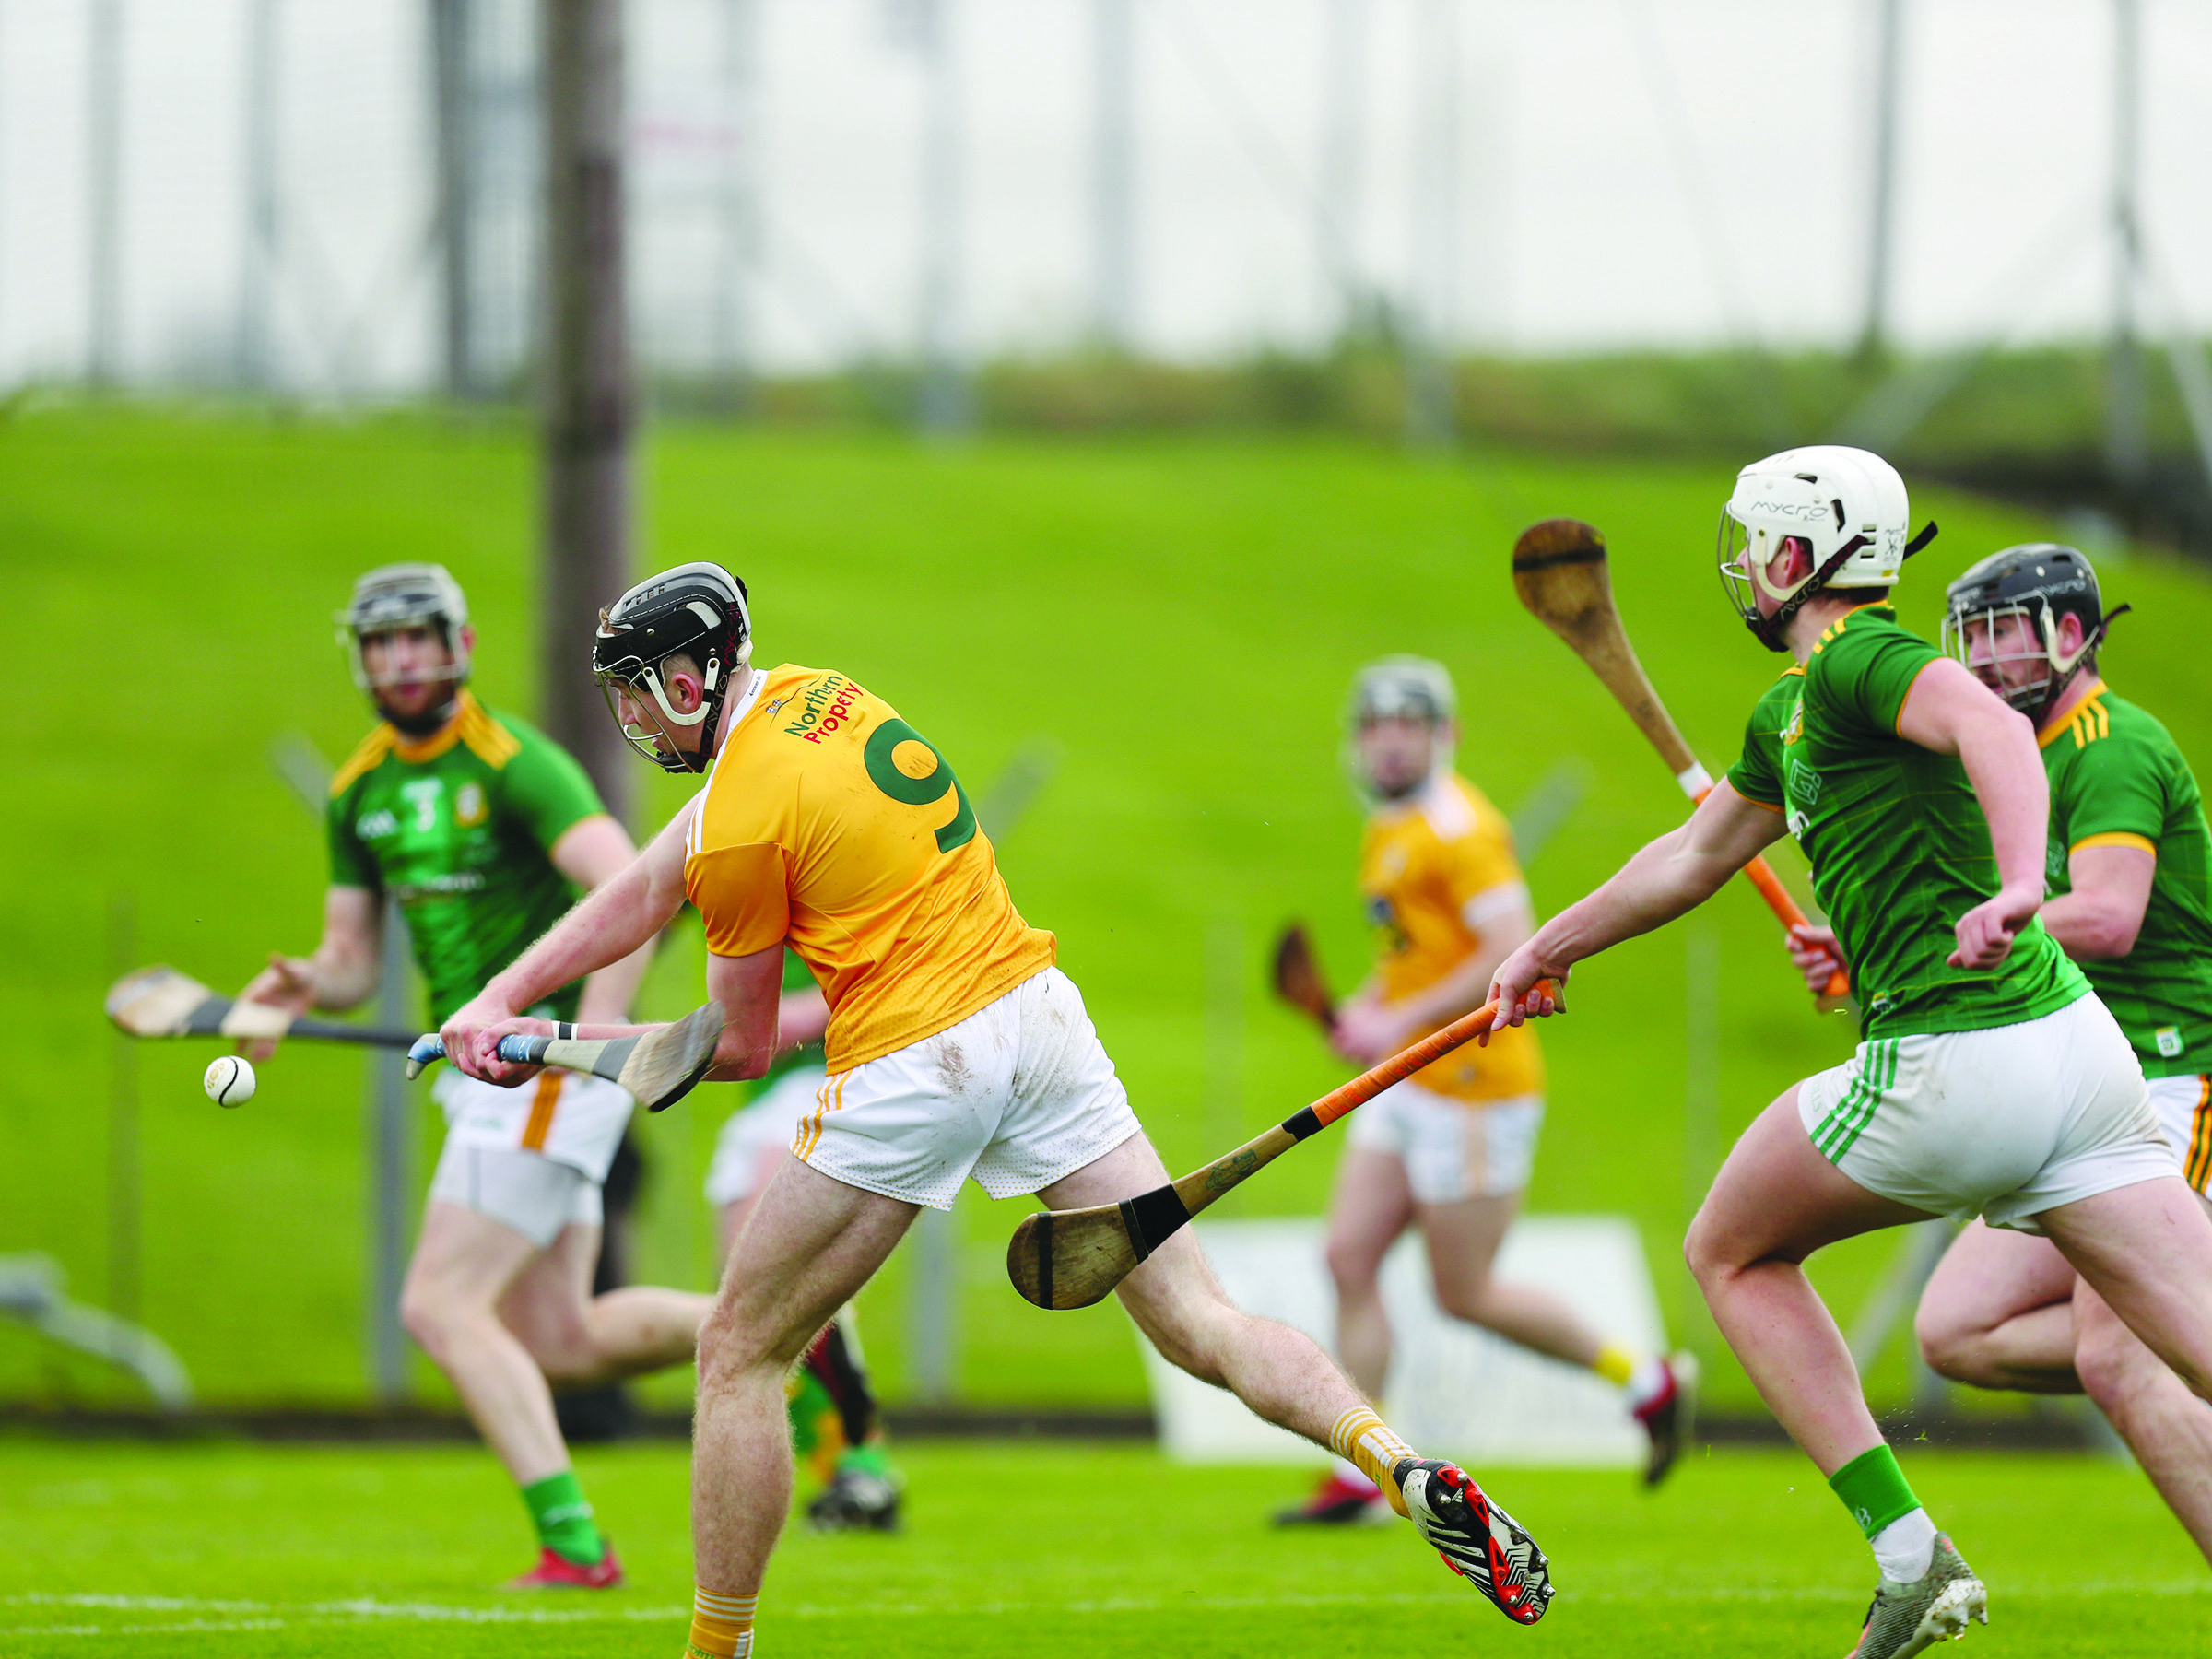 Antrim’s Aodhán O’Brien has a shot at goal during last Saturday’s Joe McDonagh Cup win over Meath at Páirc Tailteann. The victory for Darren Gleeson’s side sets up a showdown with Kerry at Croke Park on All-Ireland final day next Sunday